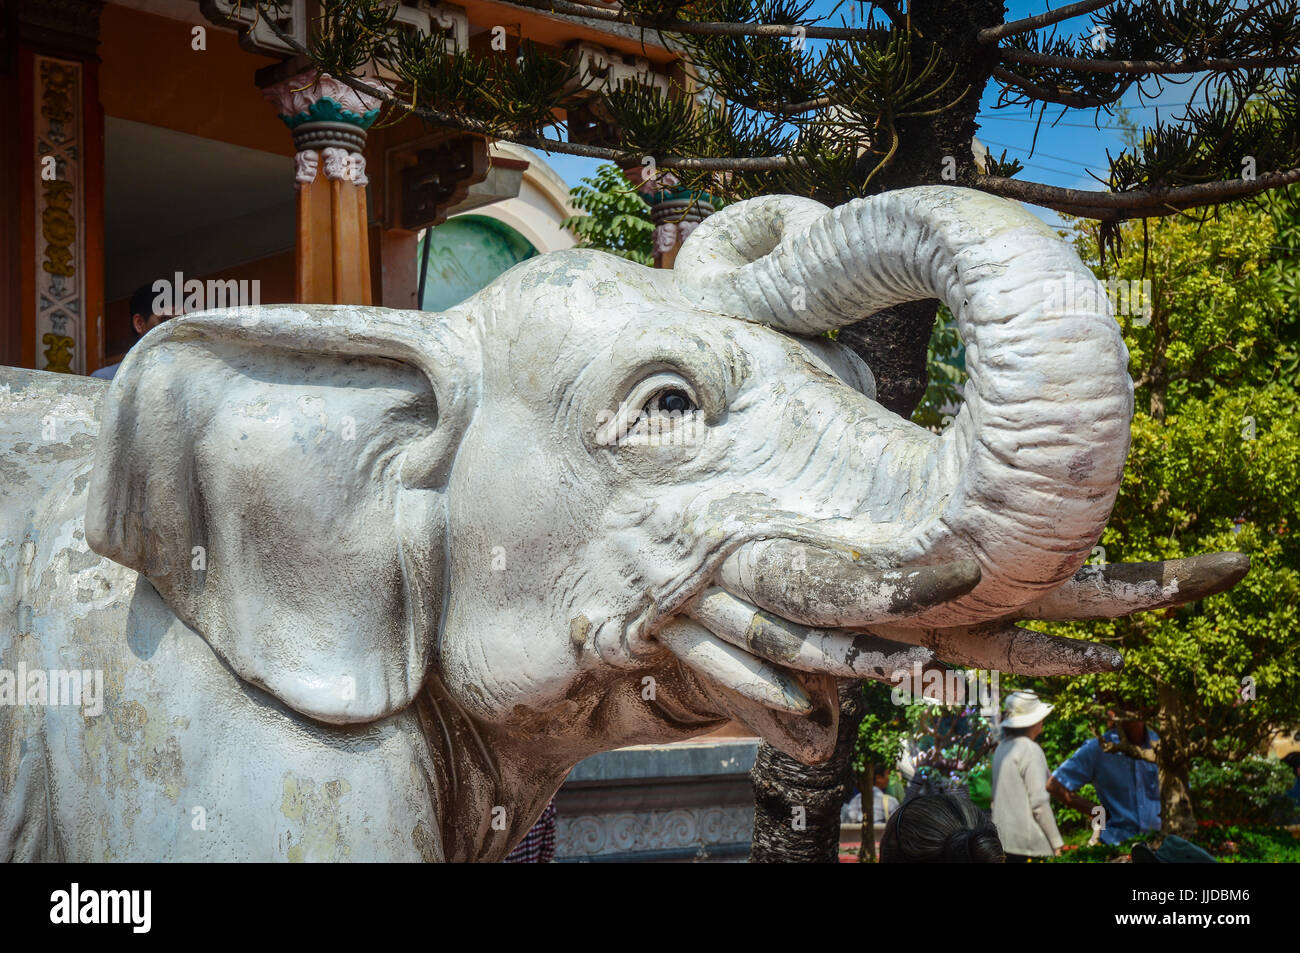 Elephant statue at the Chinese temple in Chau Doc, Vietnam. Chau Doc is best central for border crossing to Cambodia after a trip in Vietnam. Stock Photo